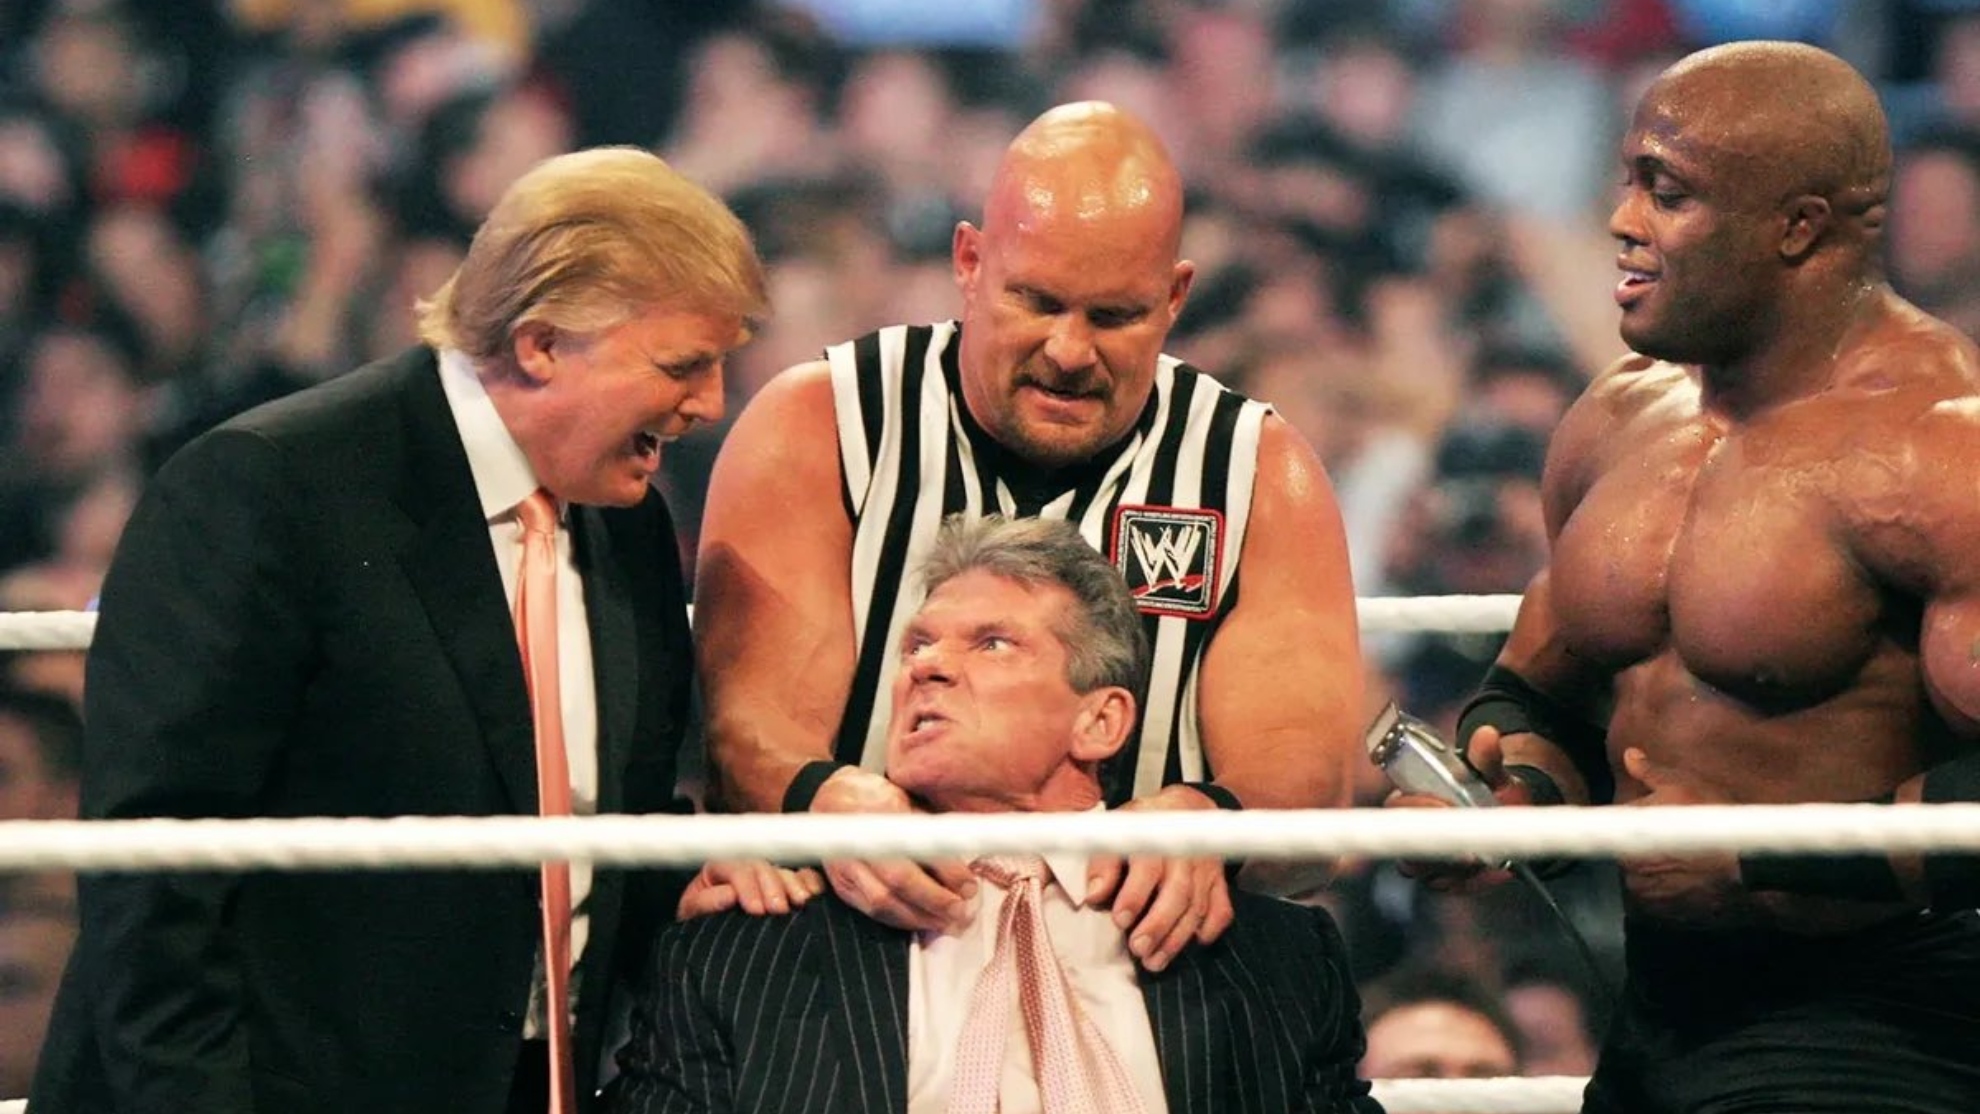 Vince McMahon getting shaved by Donald Trump